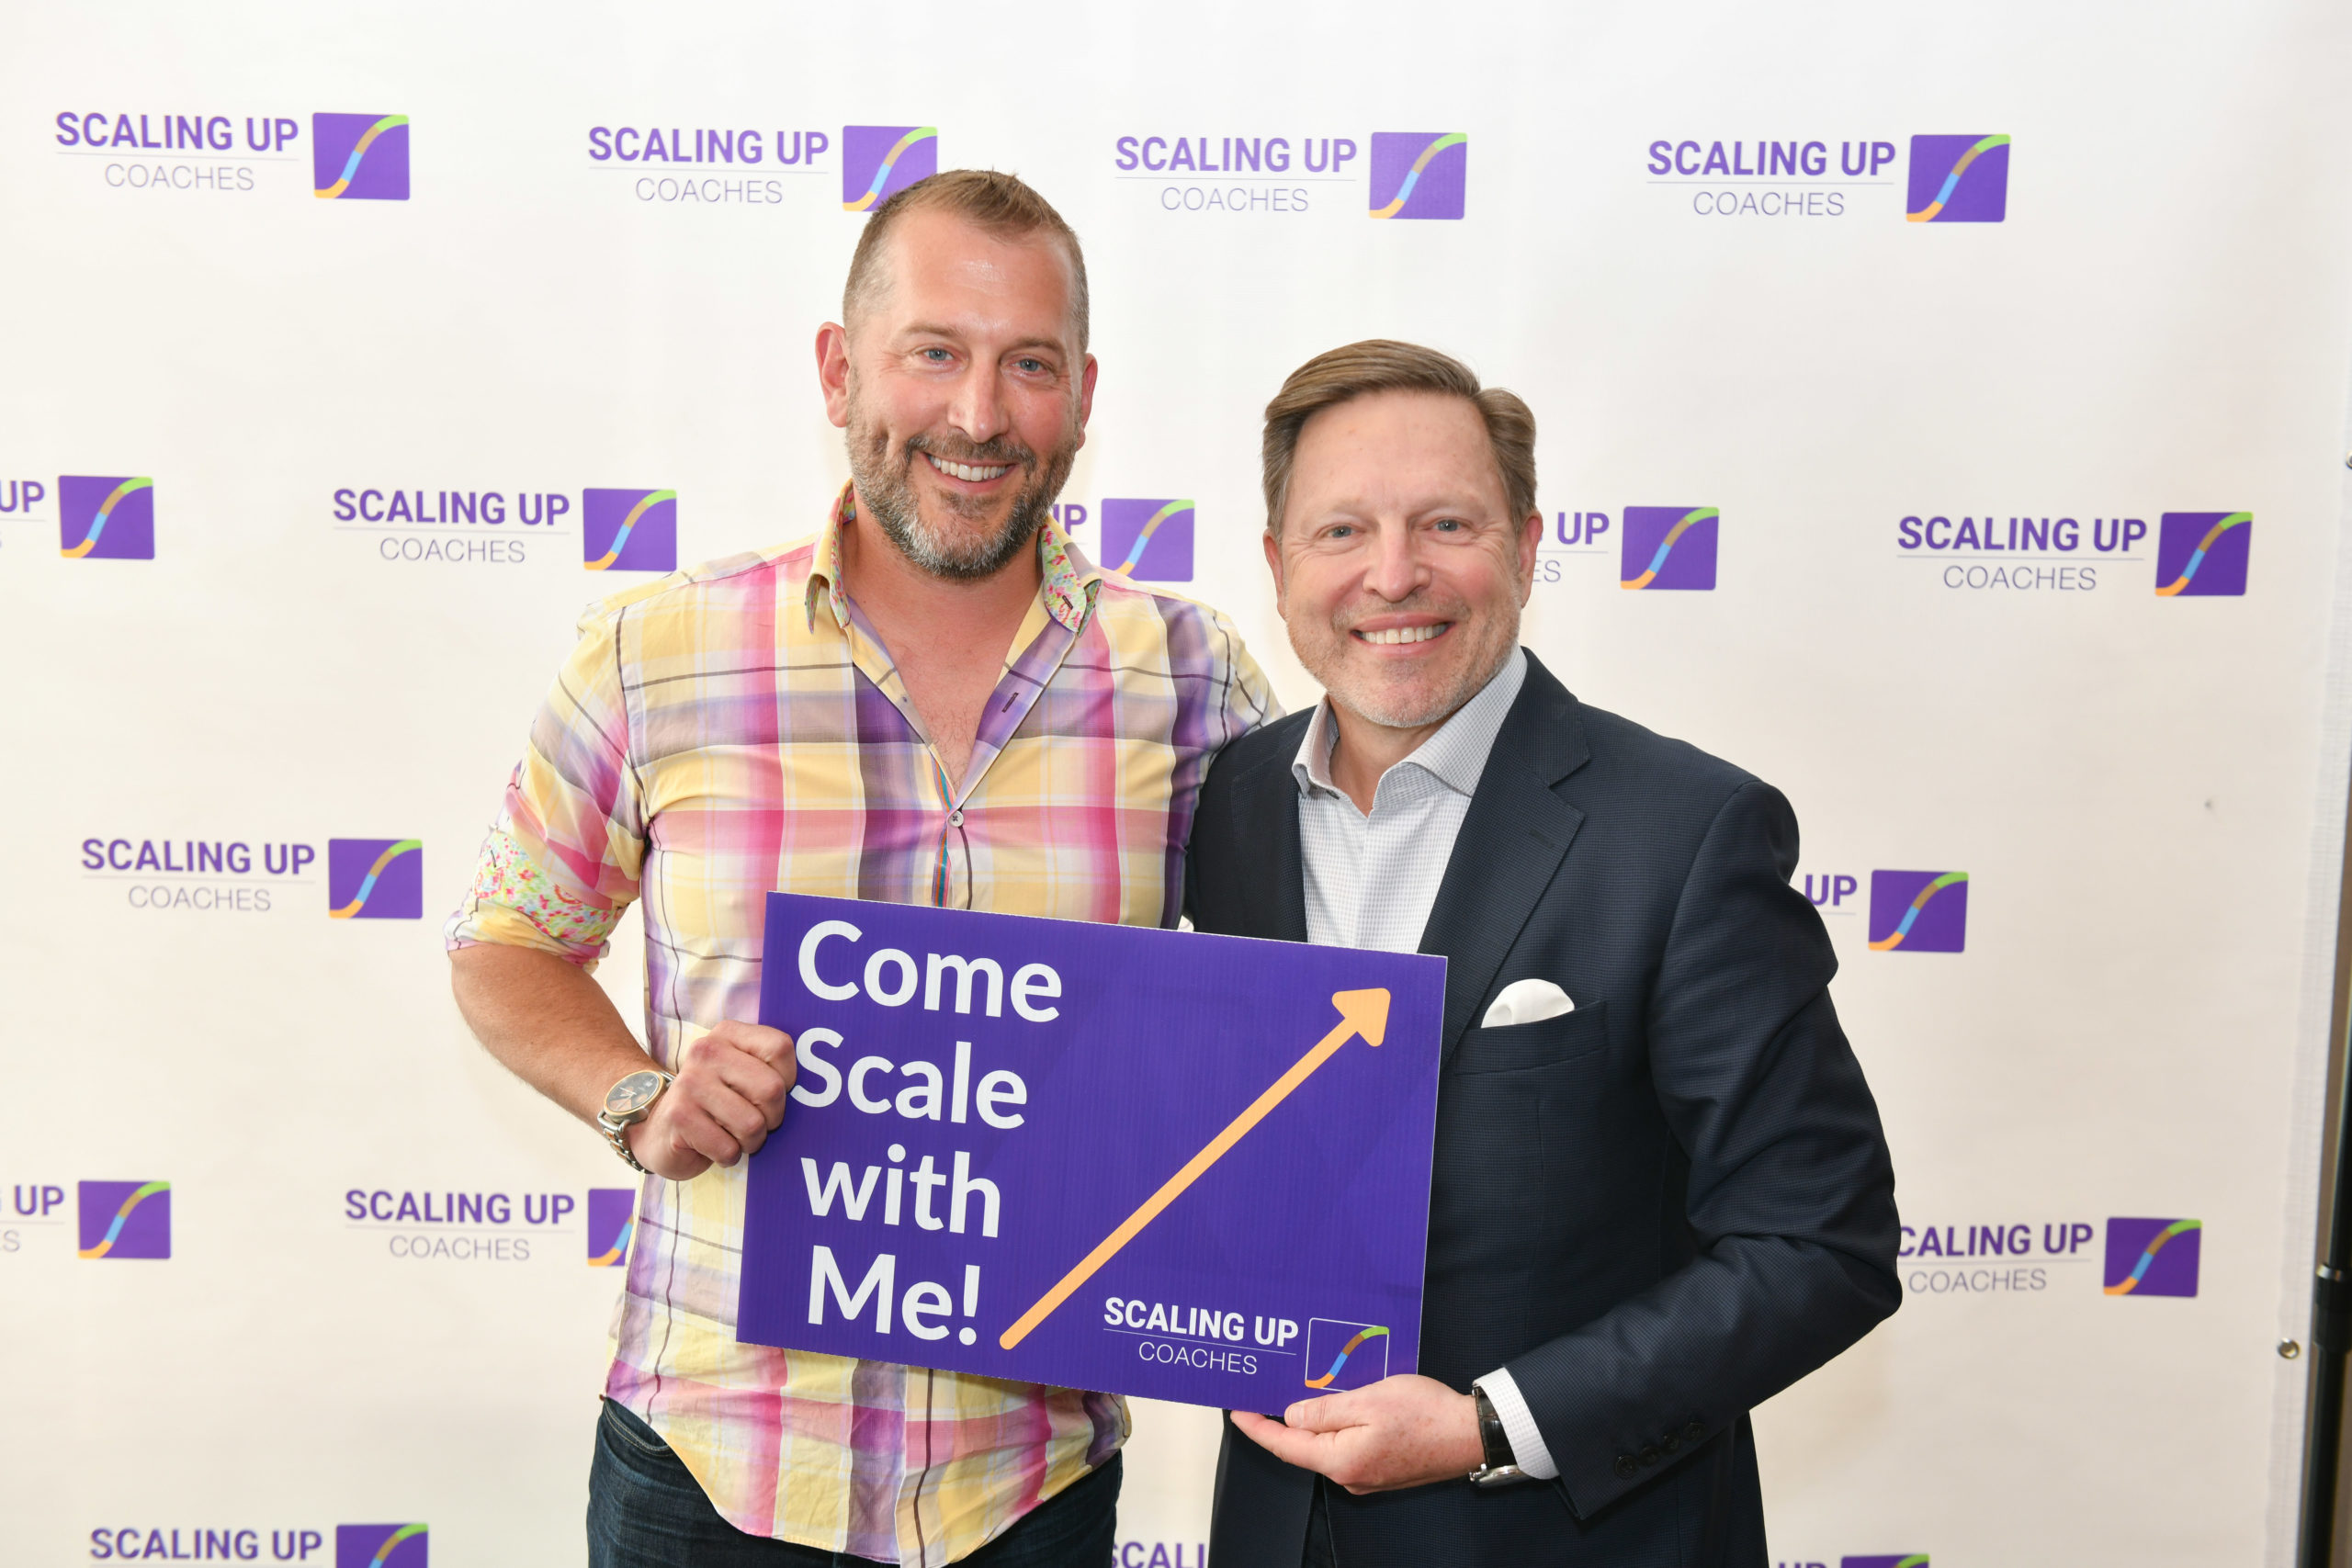 Verne Harnish (Founder of Scaling Up) and myself at the Scaling Up Coaches Summit.